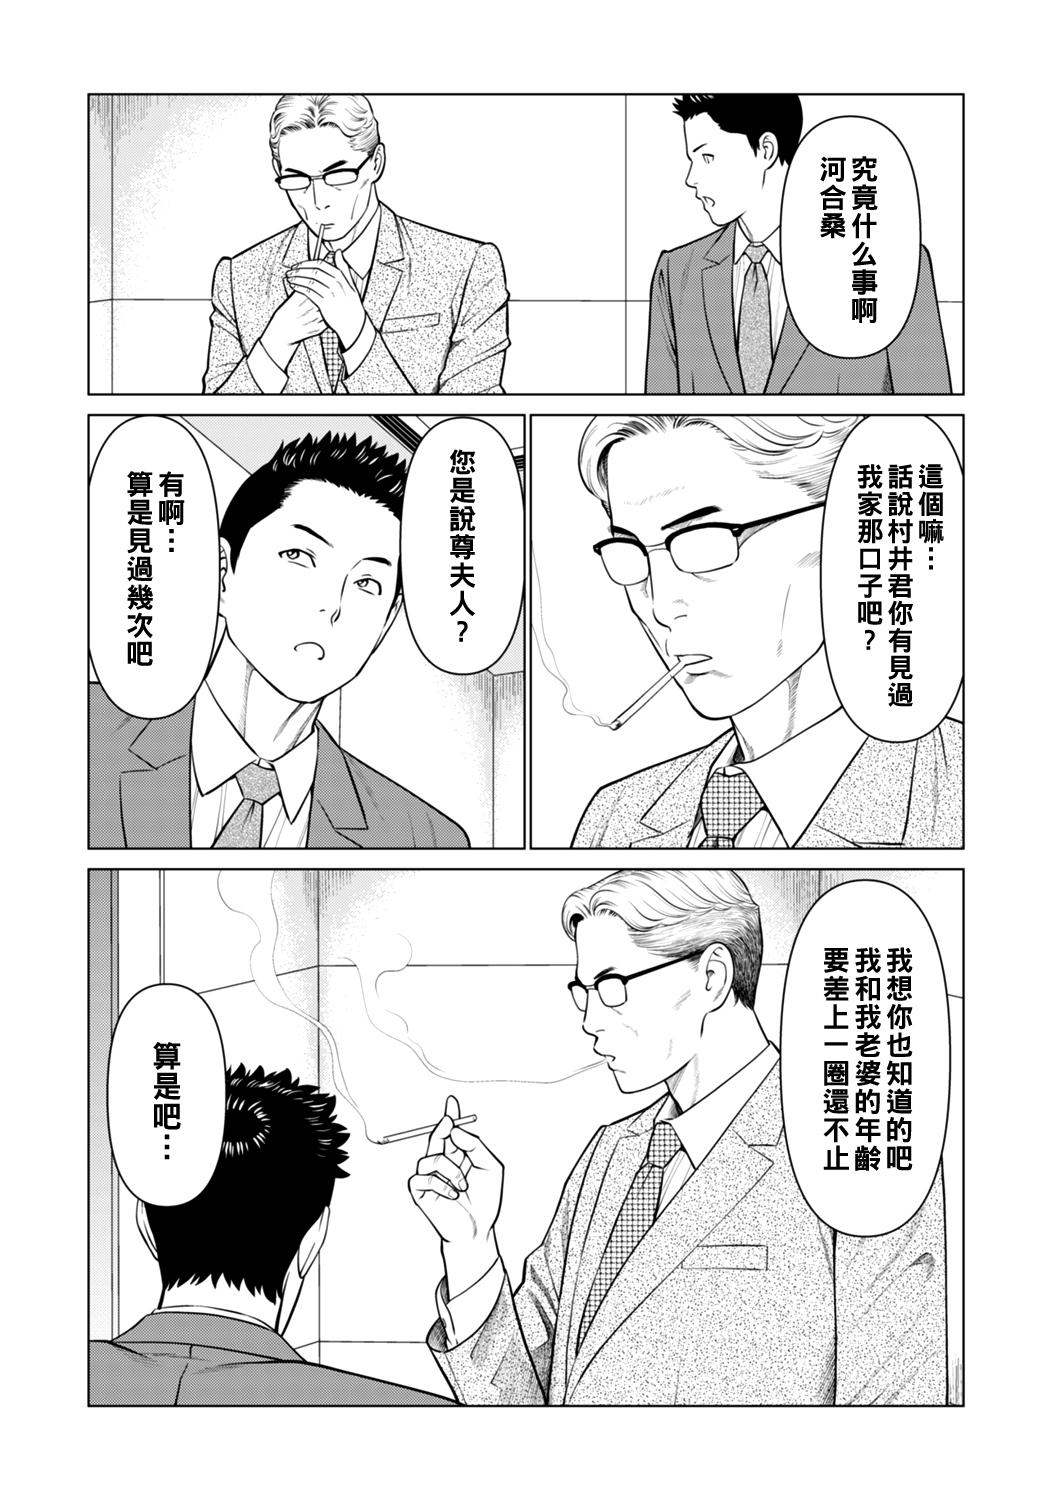 Mofos 誘い 第一話（Chinese） Spread - Page 3